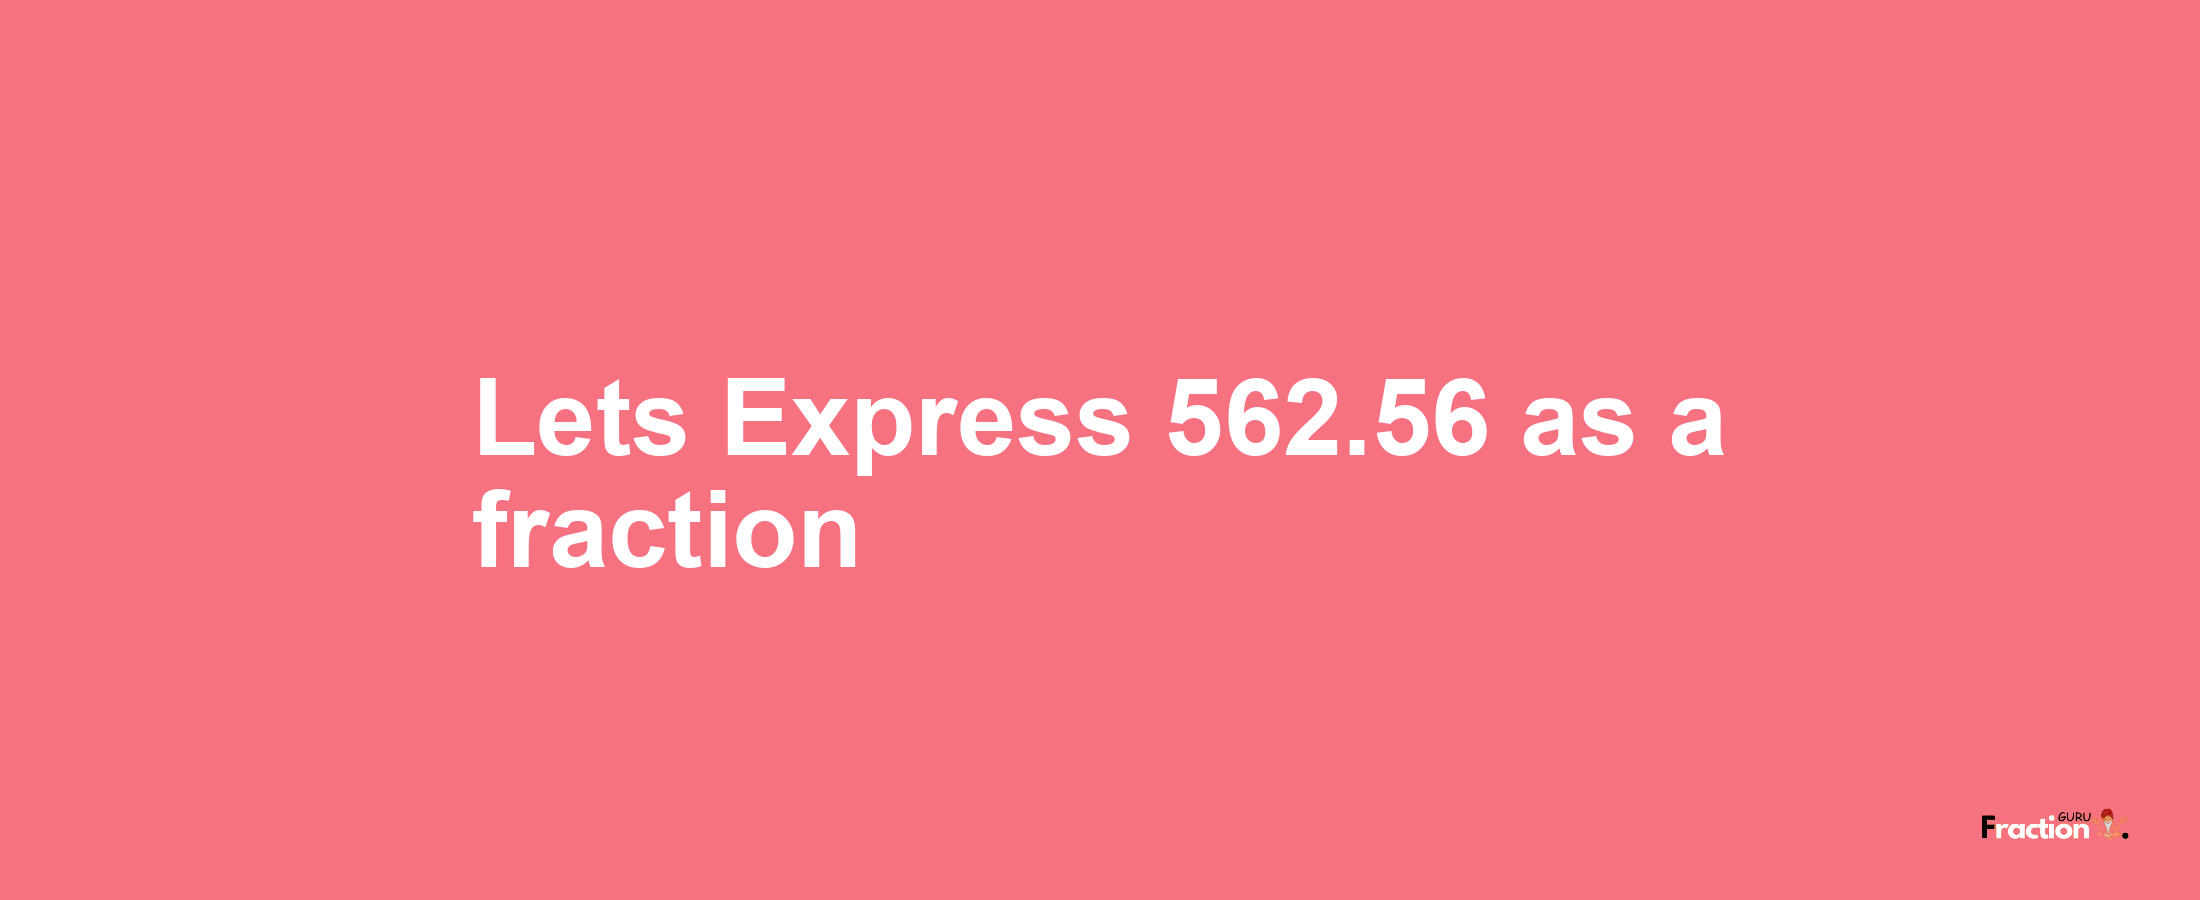 Lets Express 562.56 as afraction